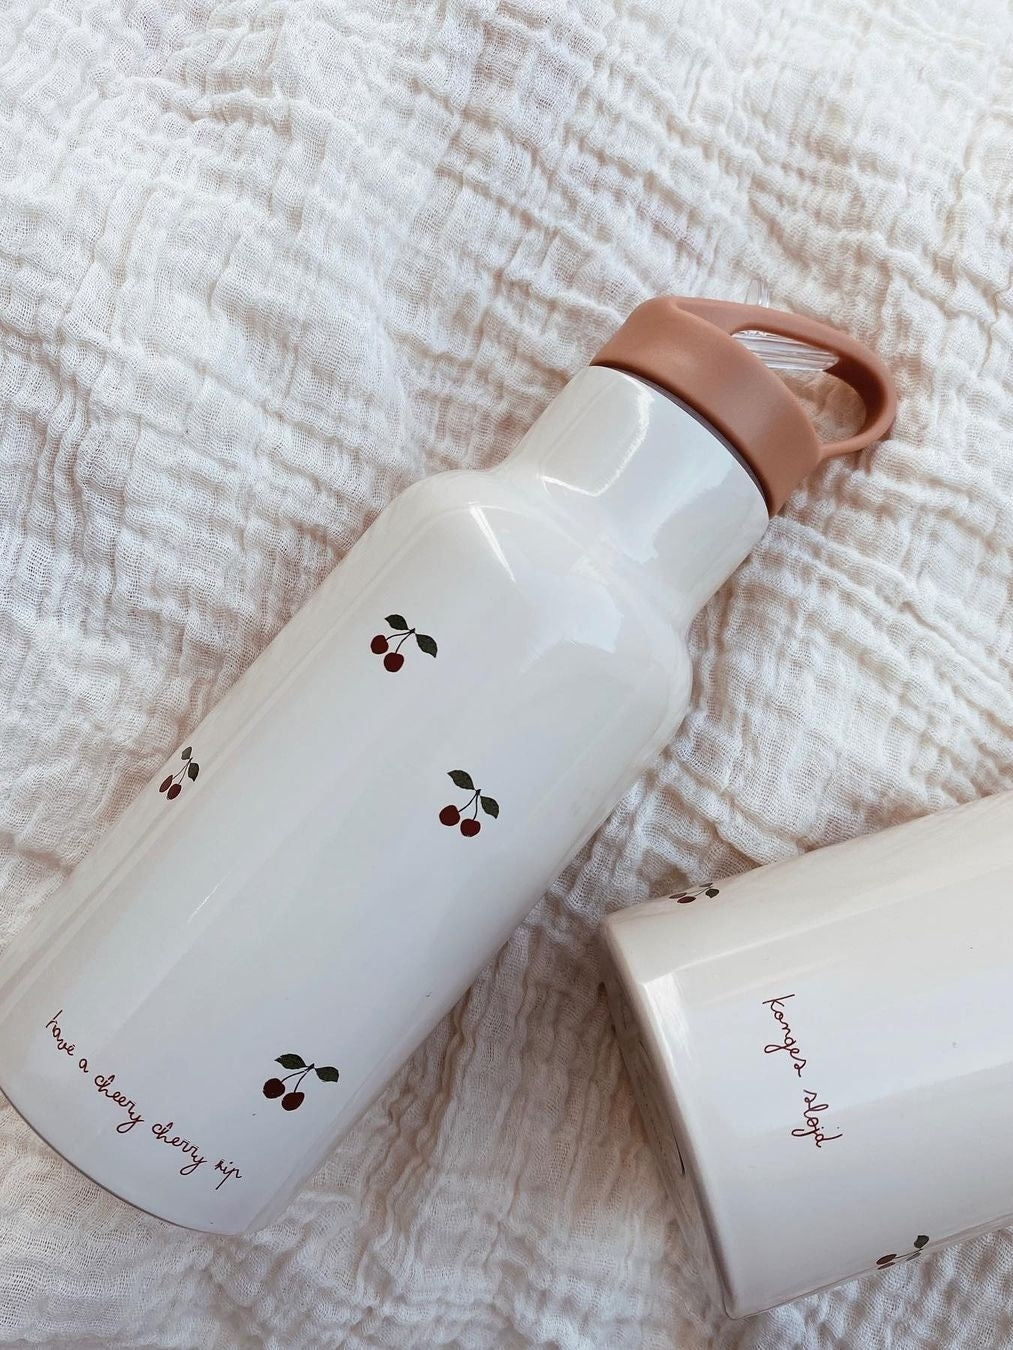 Chaotic Creations and More - LV inspired blush pink water bottle